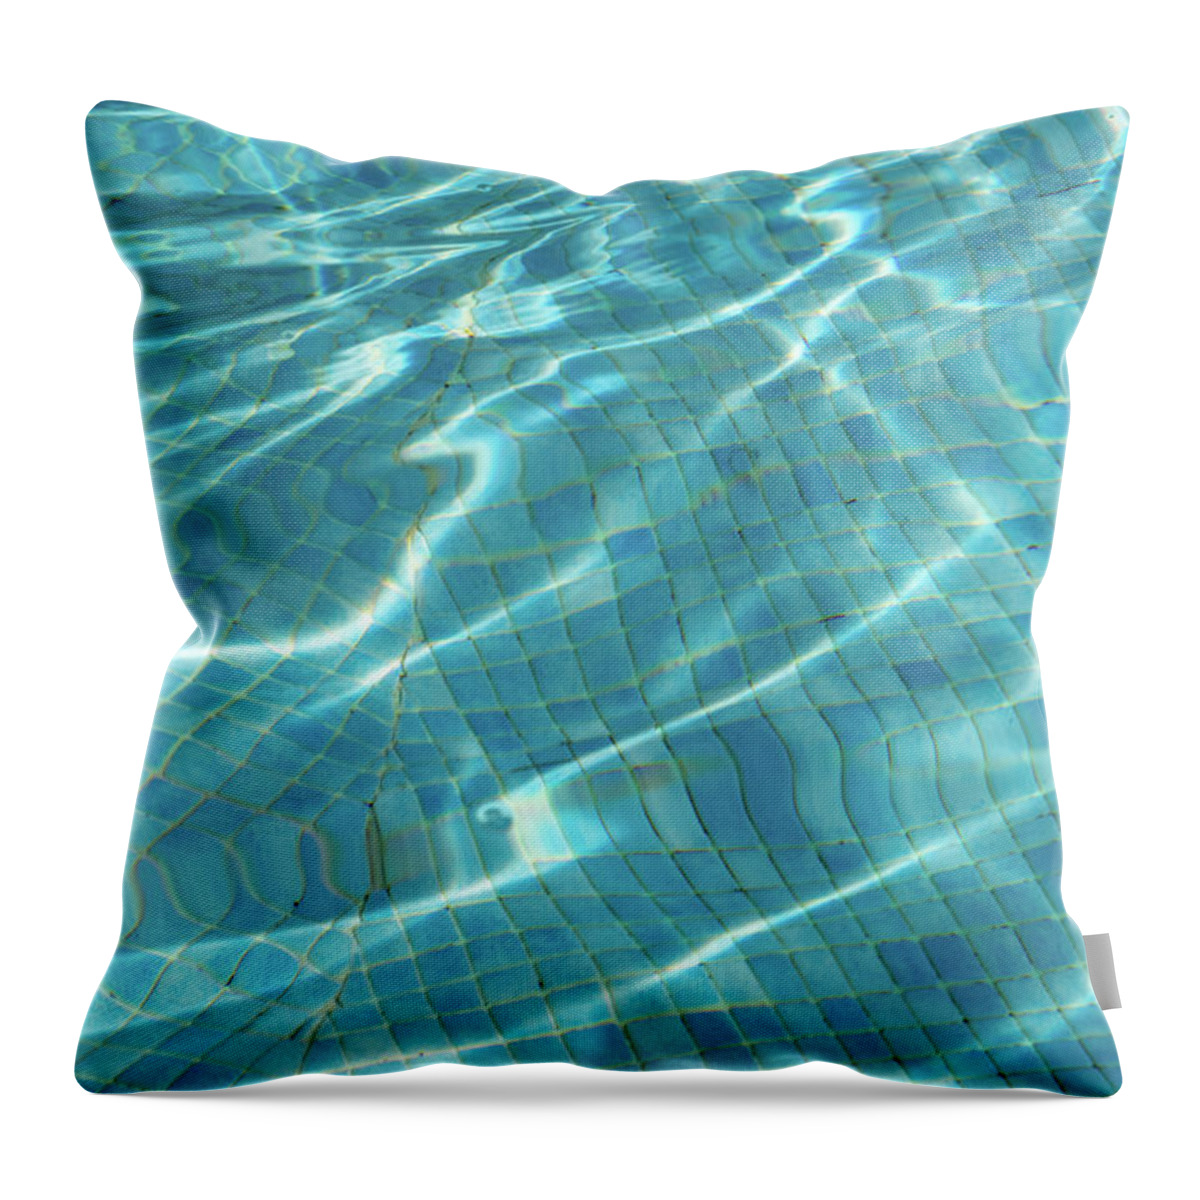 Whimsical Waterworks Throw Pillow featuring the photograph Tessellated Layers and Patterns - Sunlit Turquoise Fabstract by Georgia Mizuleva